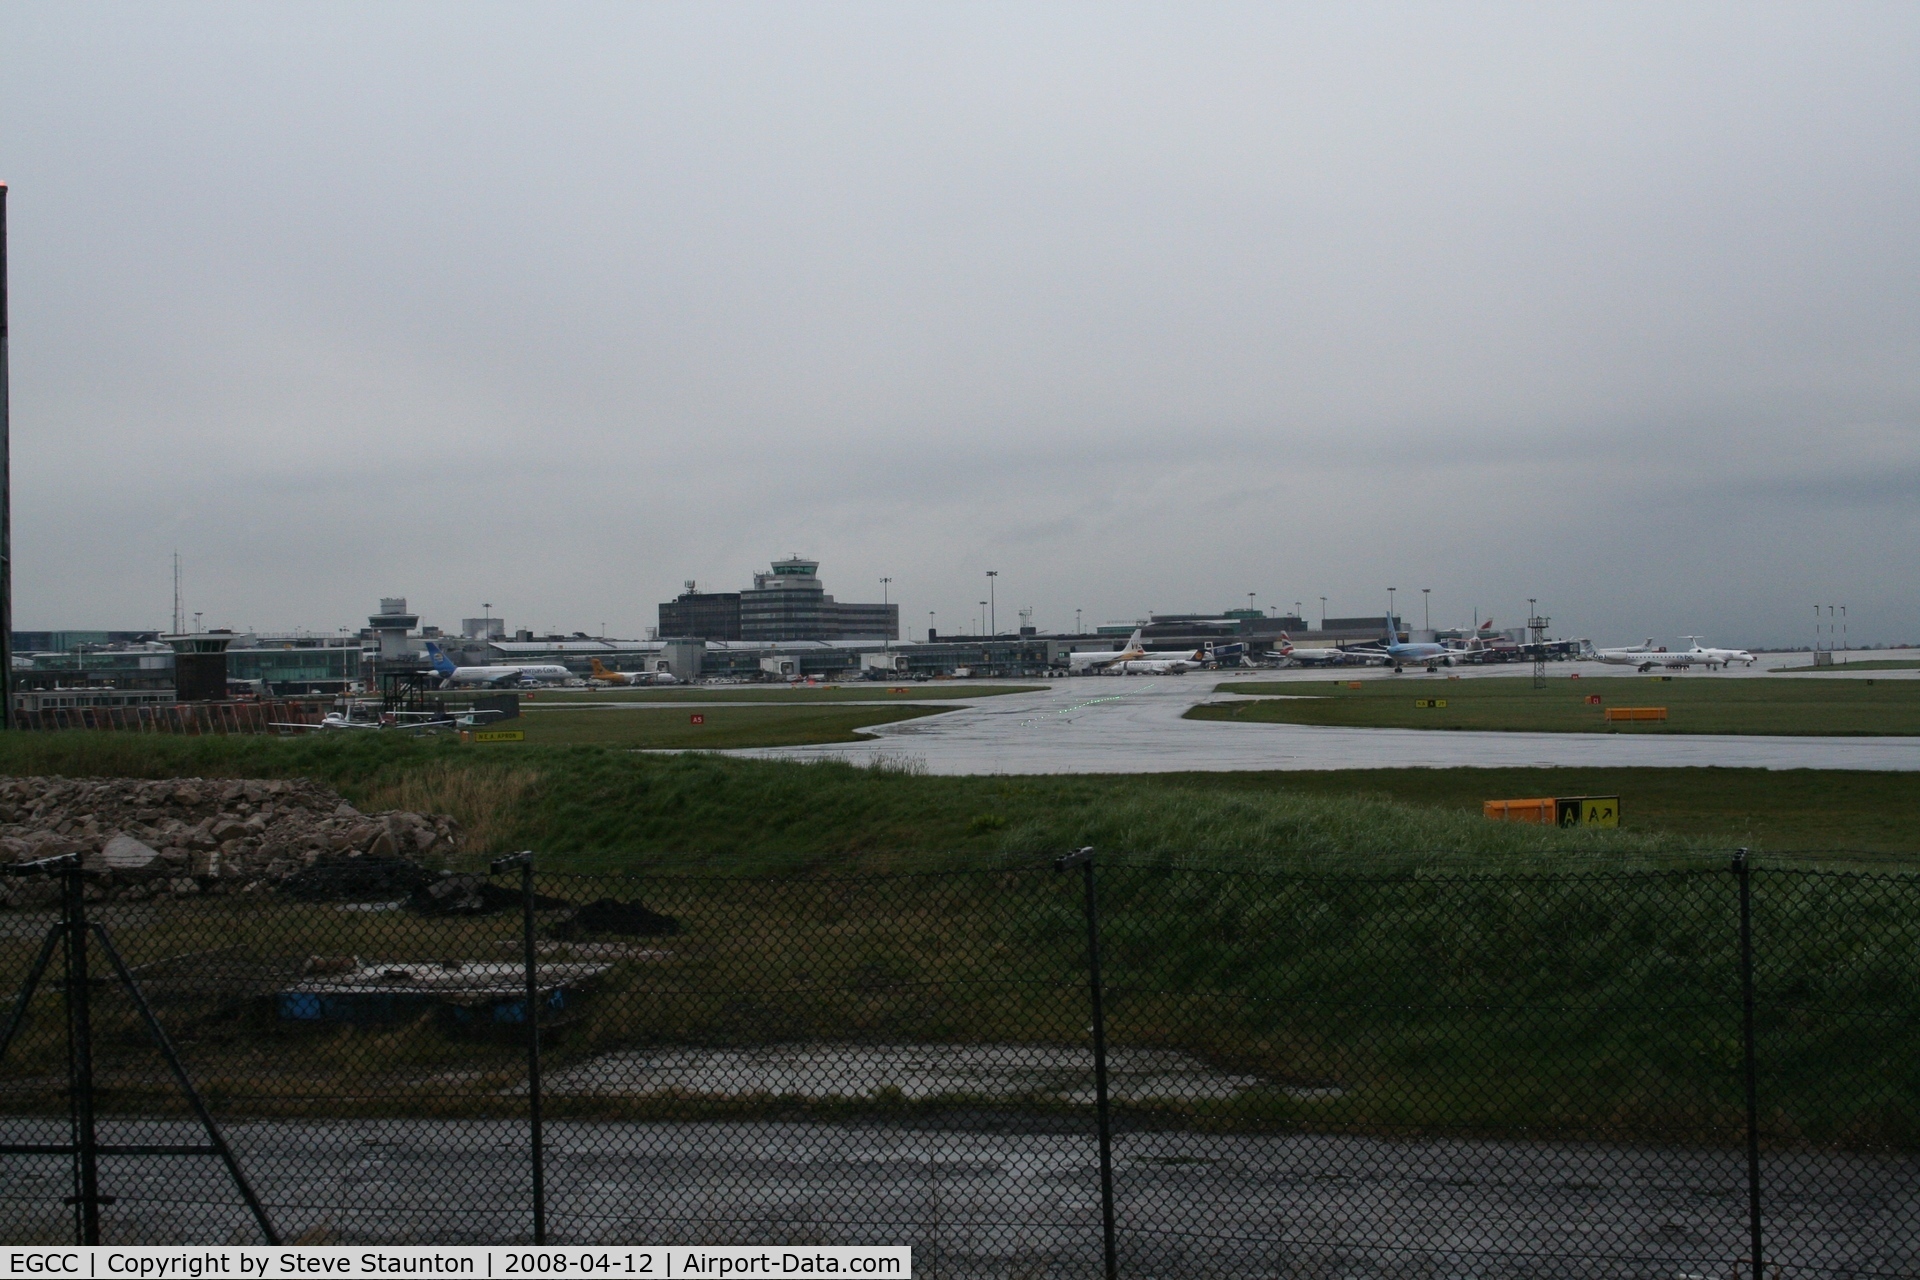 Manchester Airport, Manchester, England United Kingdom (EGCC) - Taken at Manchester Airport on a typical showery April day